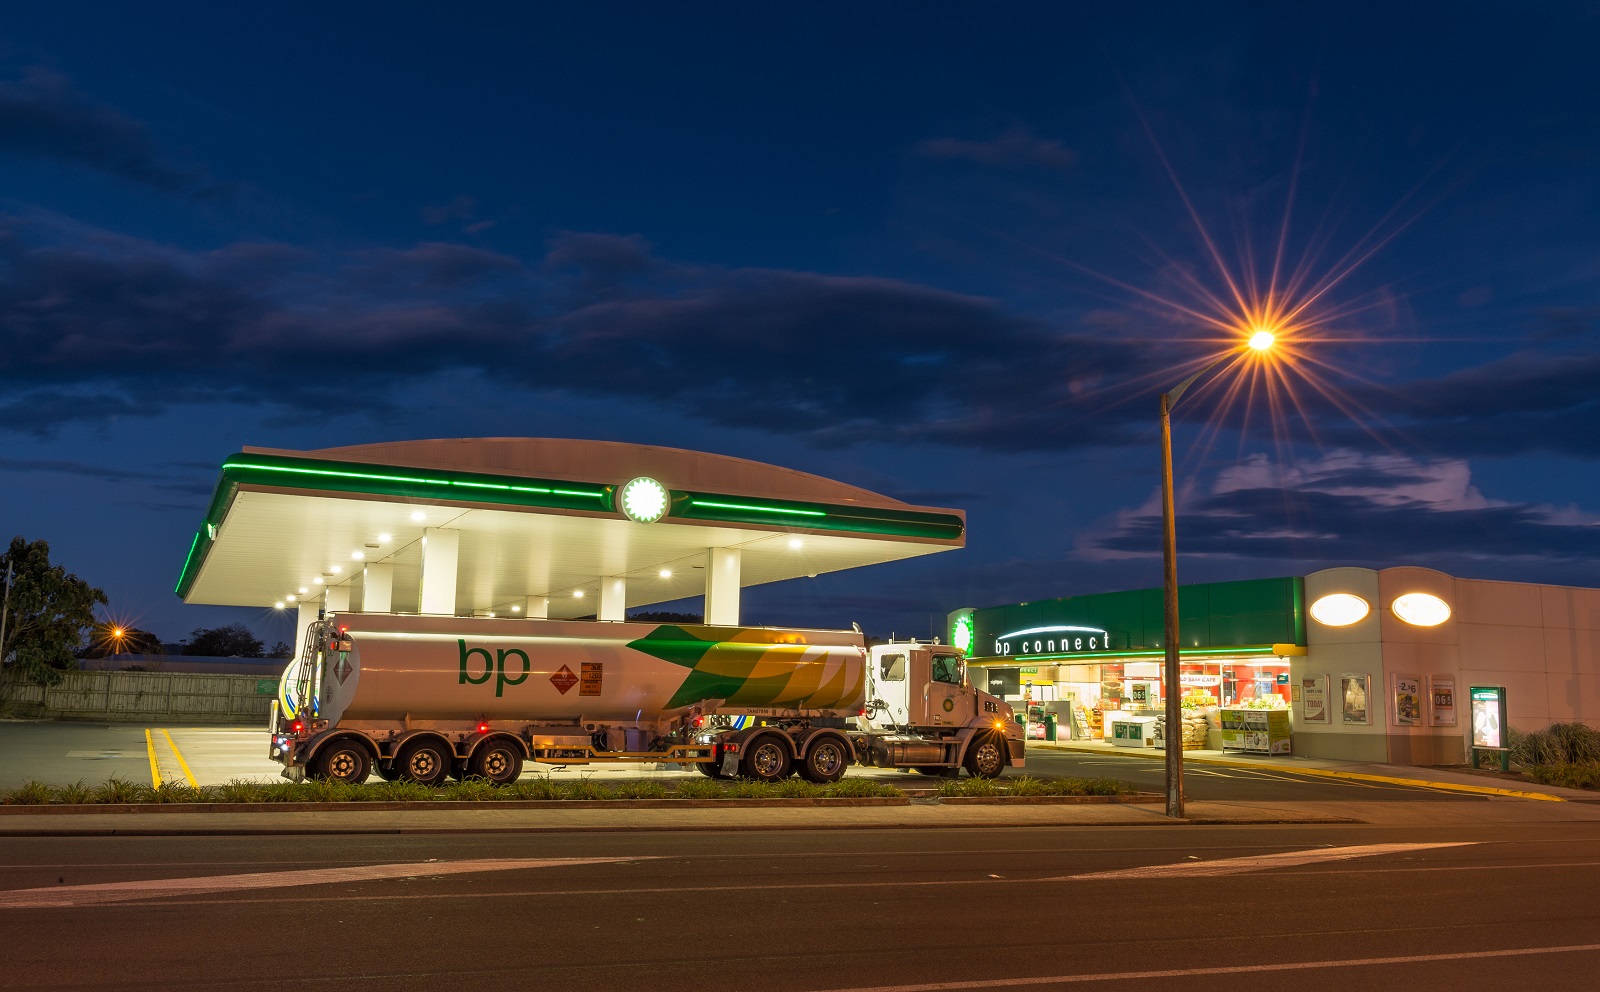 Tanker truck in front of petrol station with street lighting at night, Otago, South Island, New Zealand, Image: 471274035, License: Rights-managed, Restrictions: , Model Release: no, Credit line: Gerhard Zwerger-Schoner / imageBROKER / Profimedia